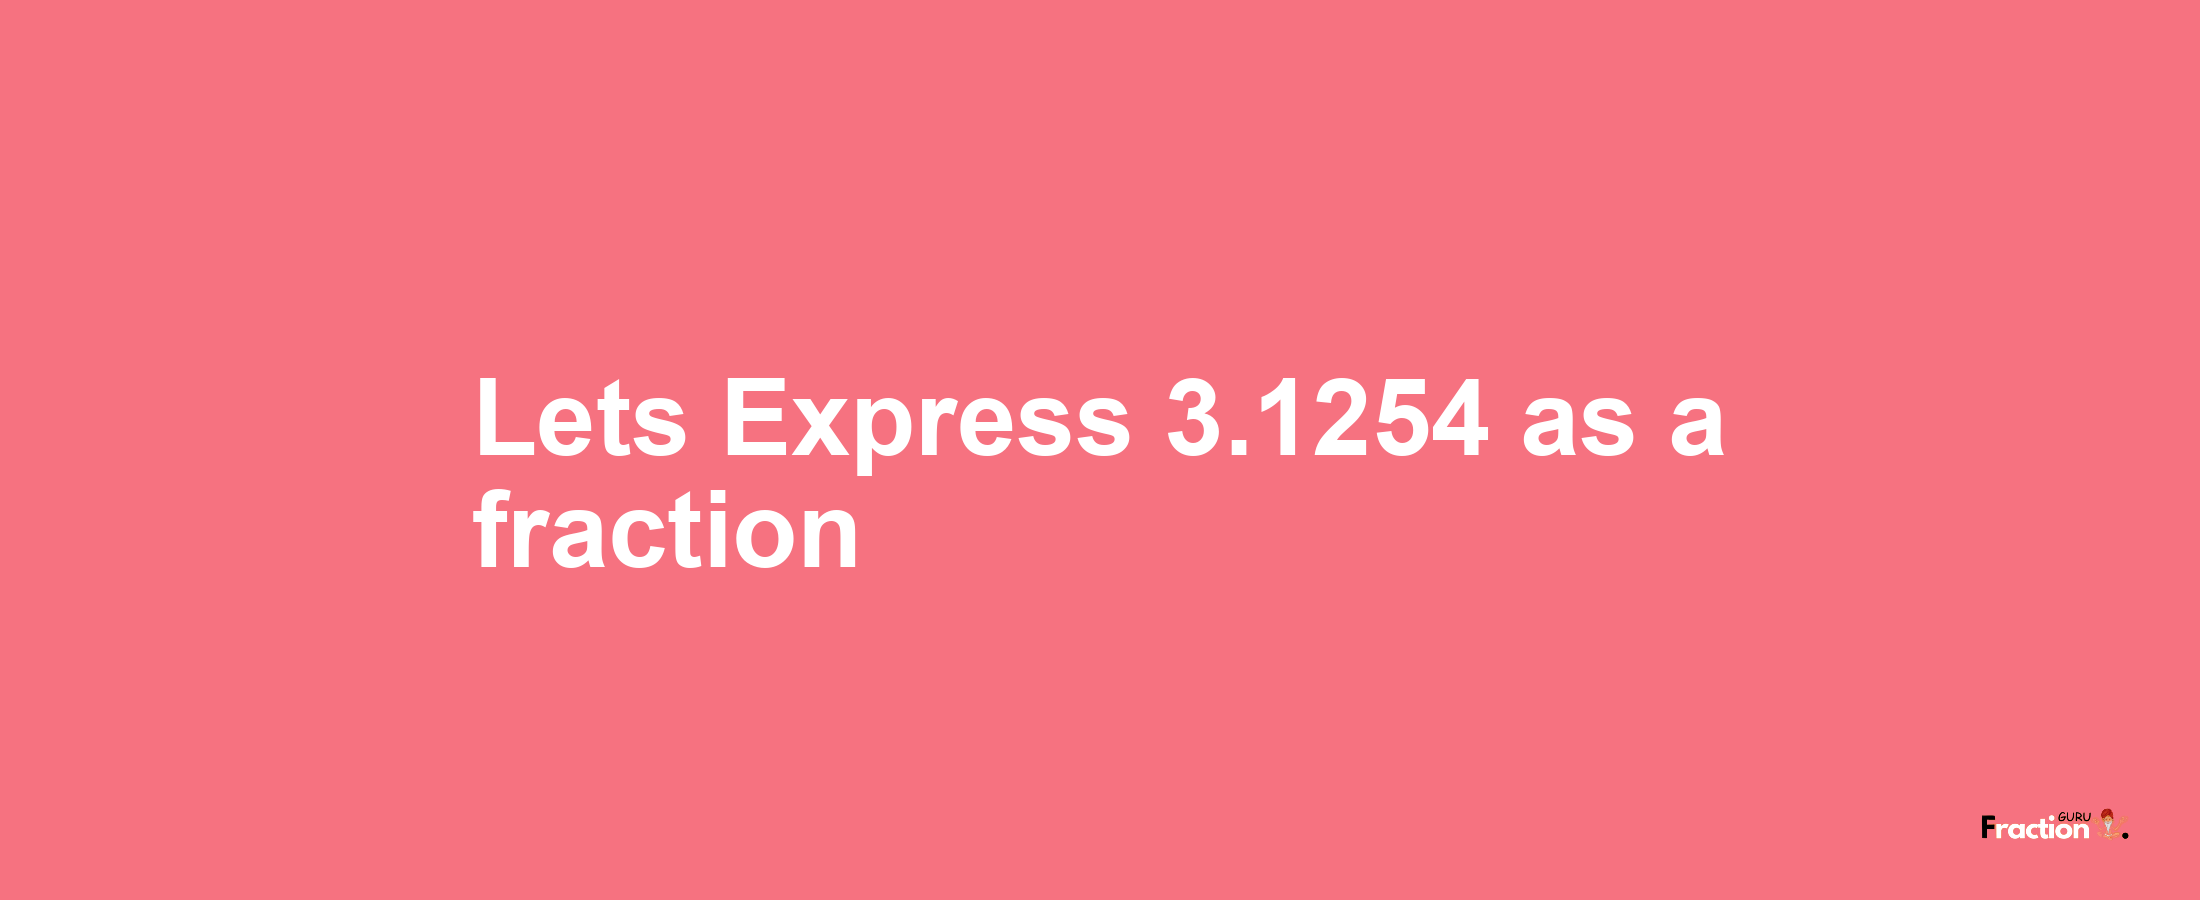 Lets Express 3.1254 as afraction